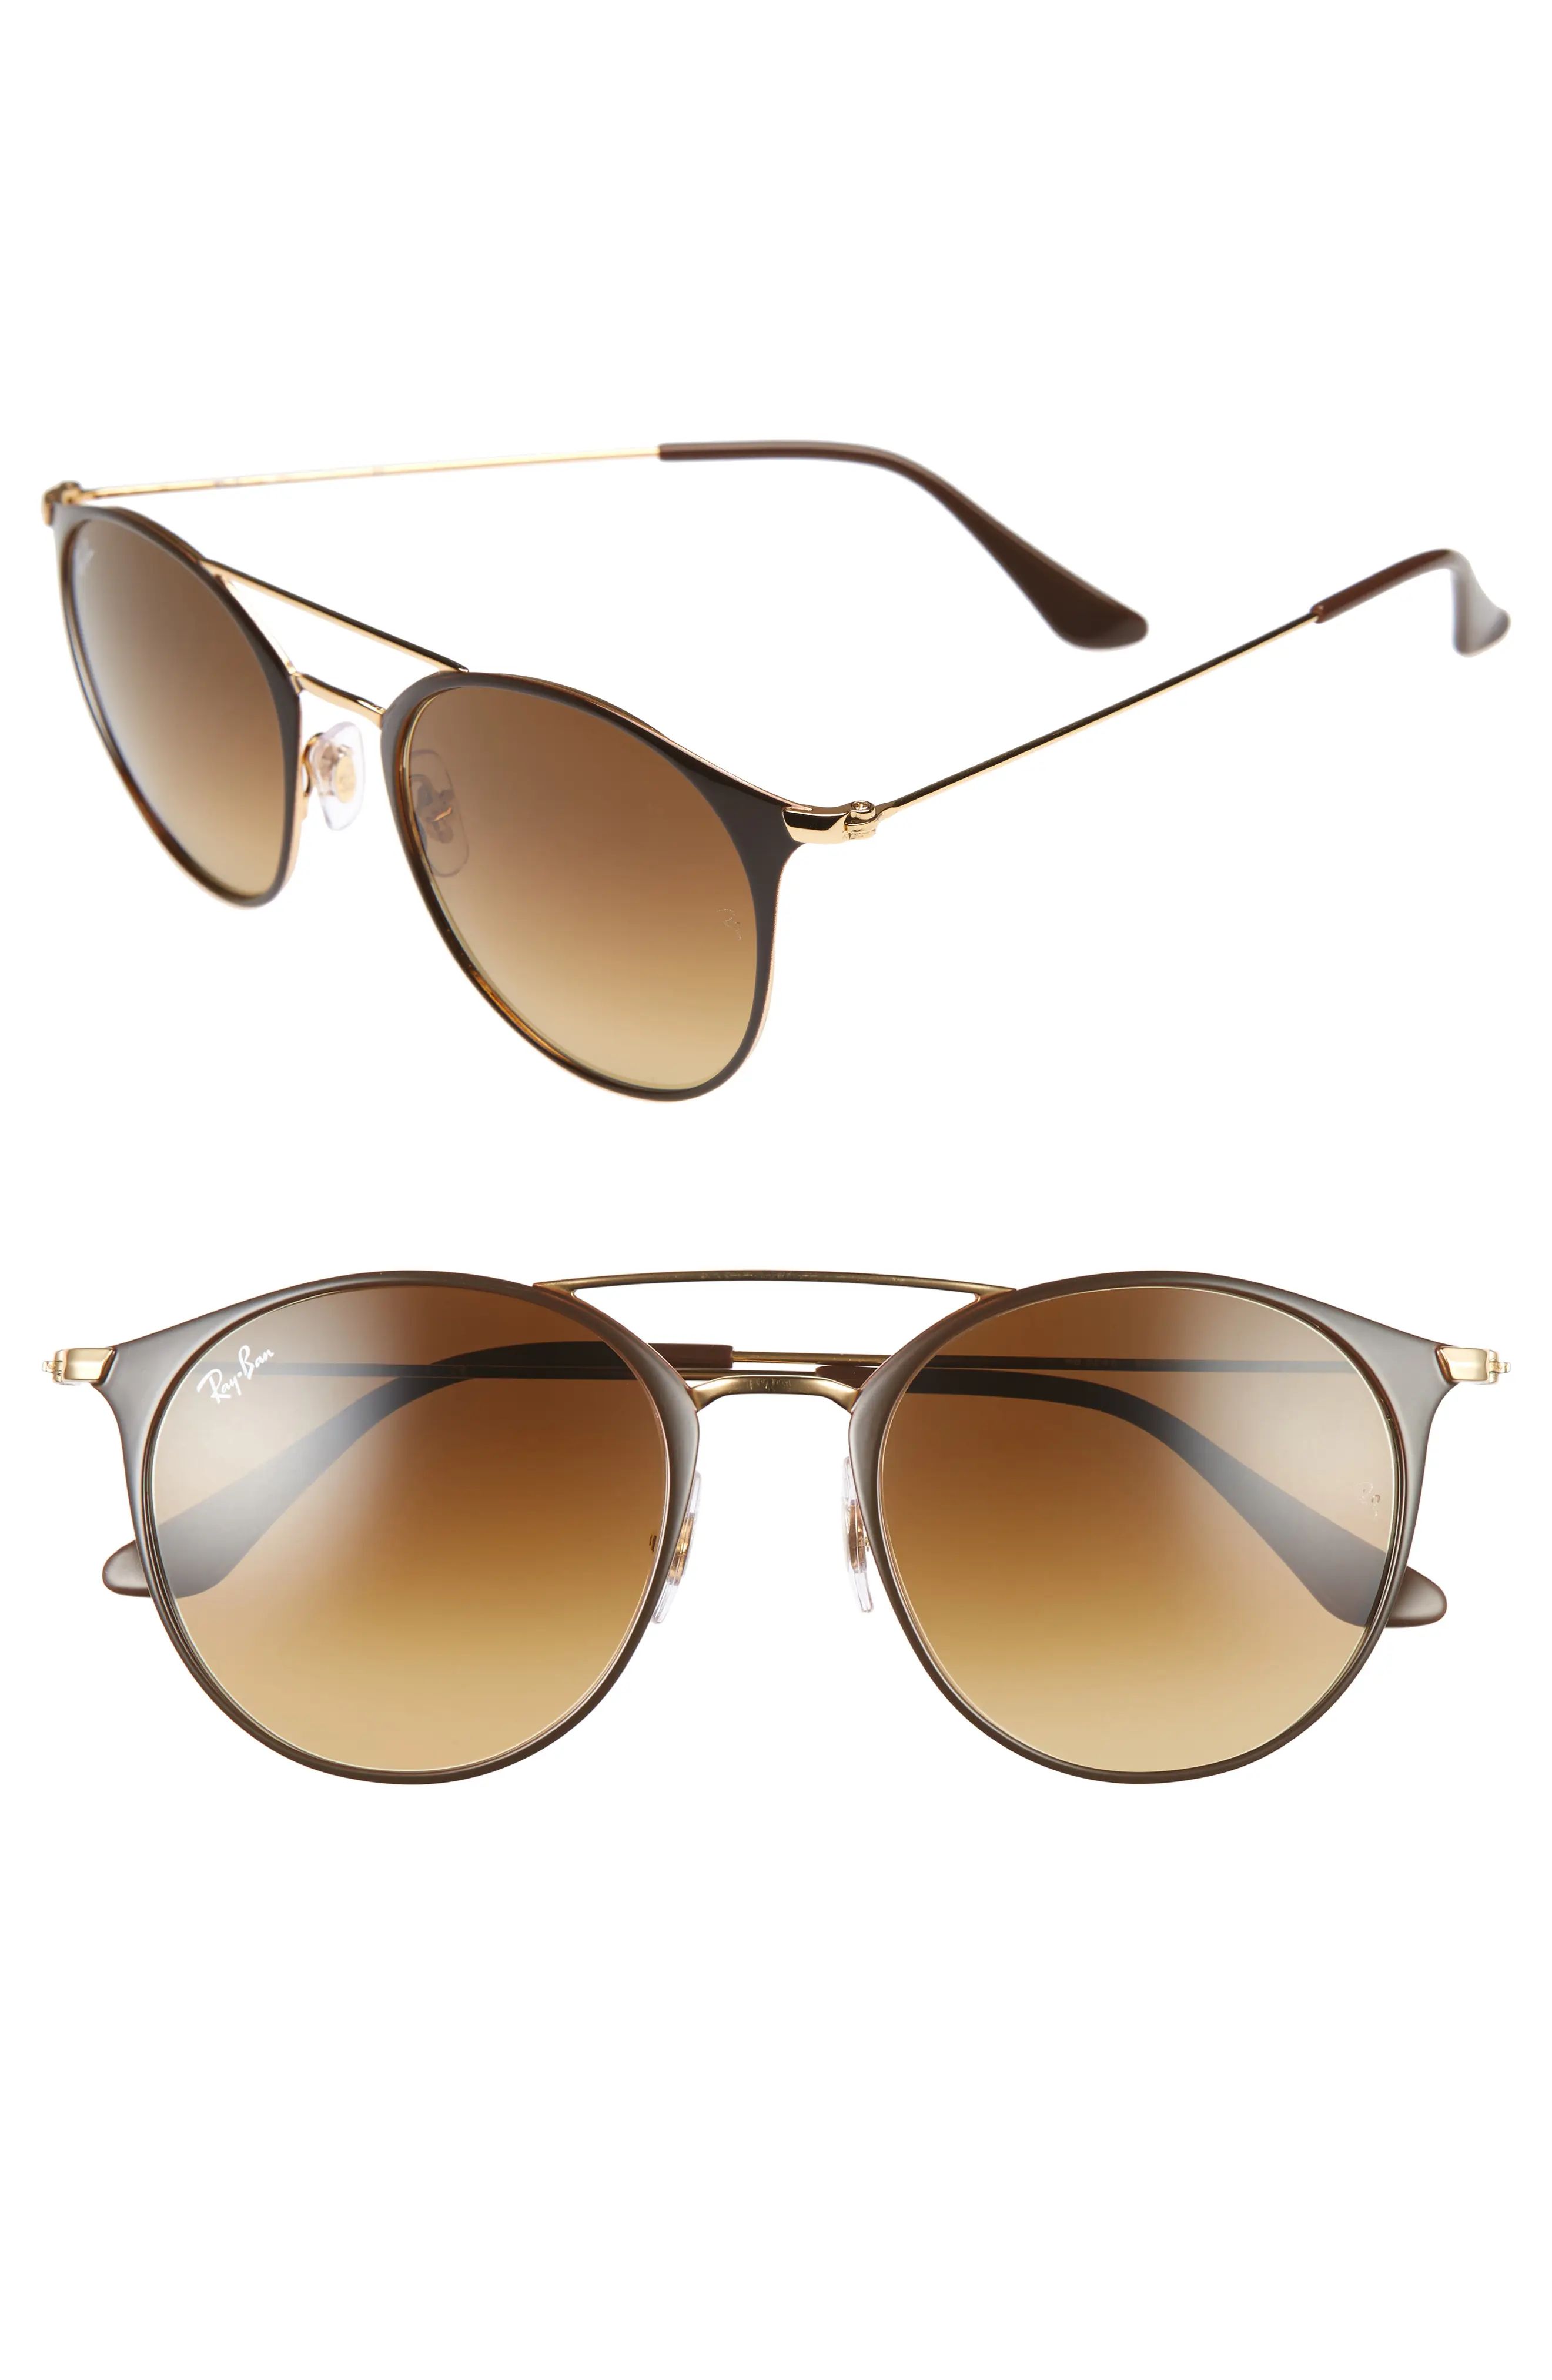 Ray-Ban Highstreet 52mm Round Brow Bar Sunglasses - Brown/ Gold | Nordstrom